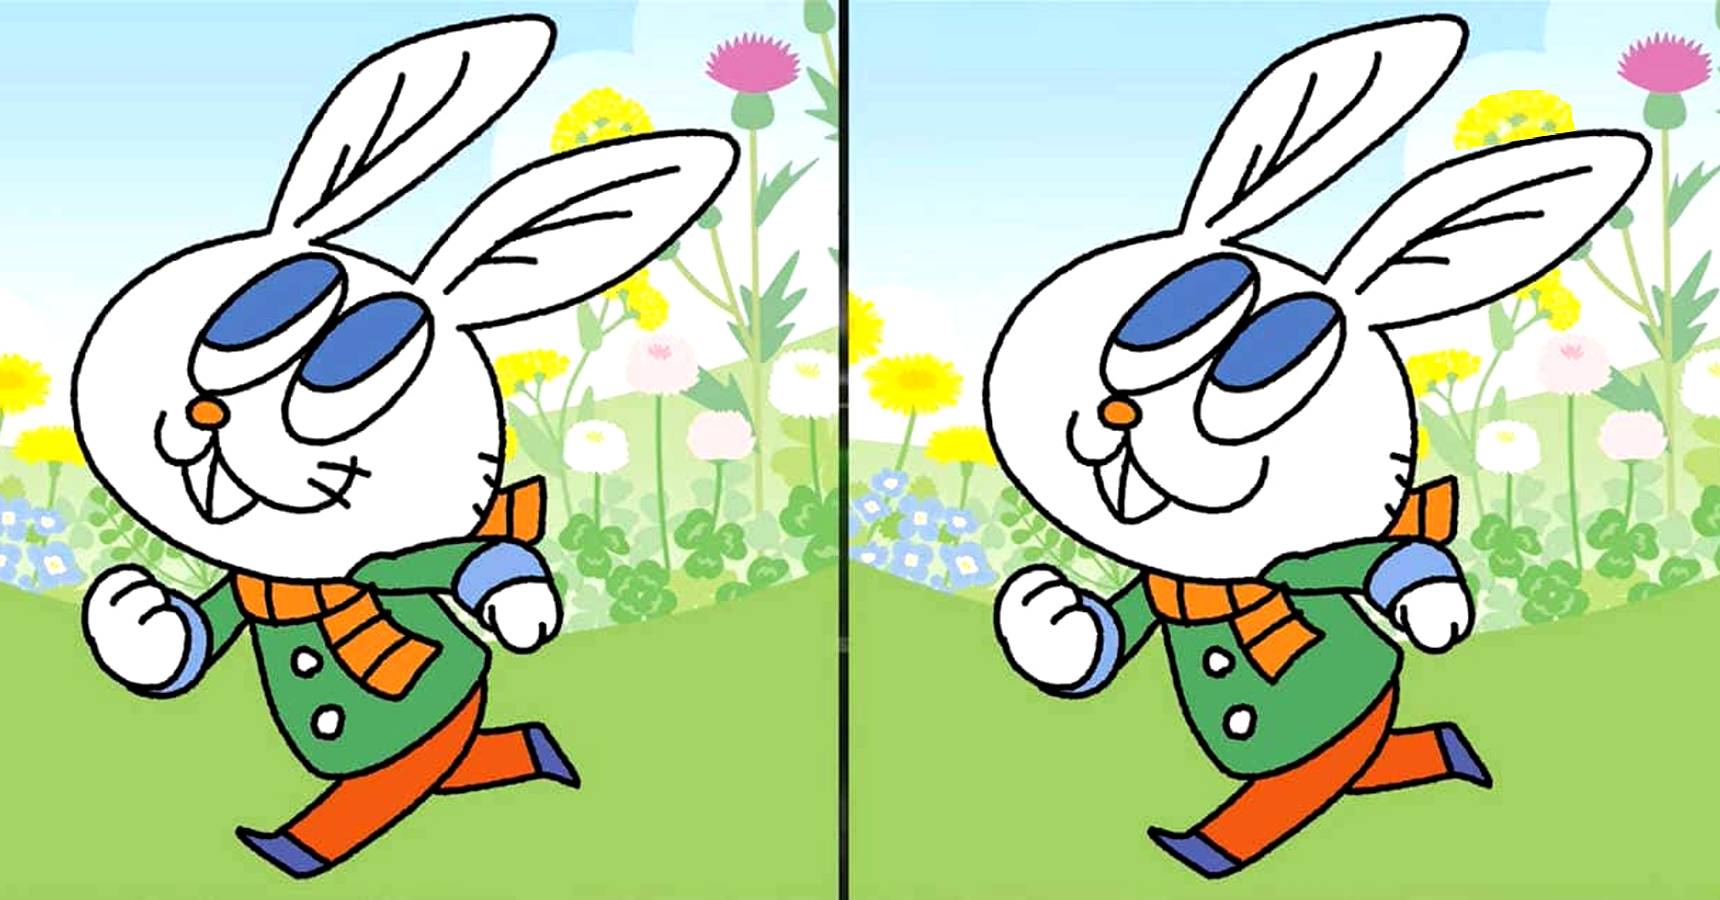 Brain teaser can you find 3 differences between two rabbits within 8 seconds